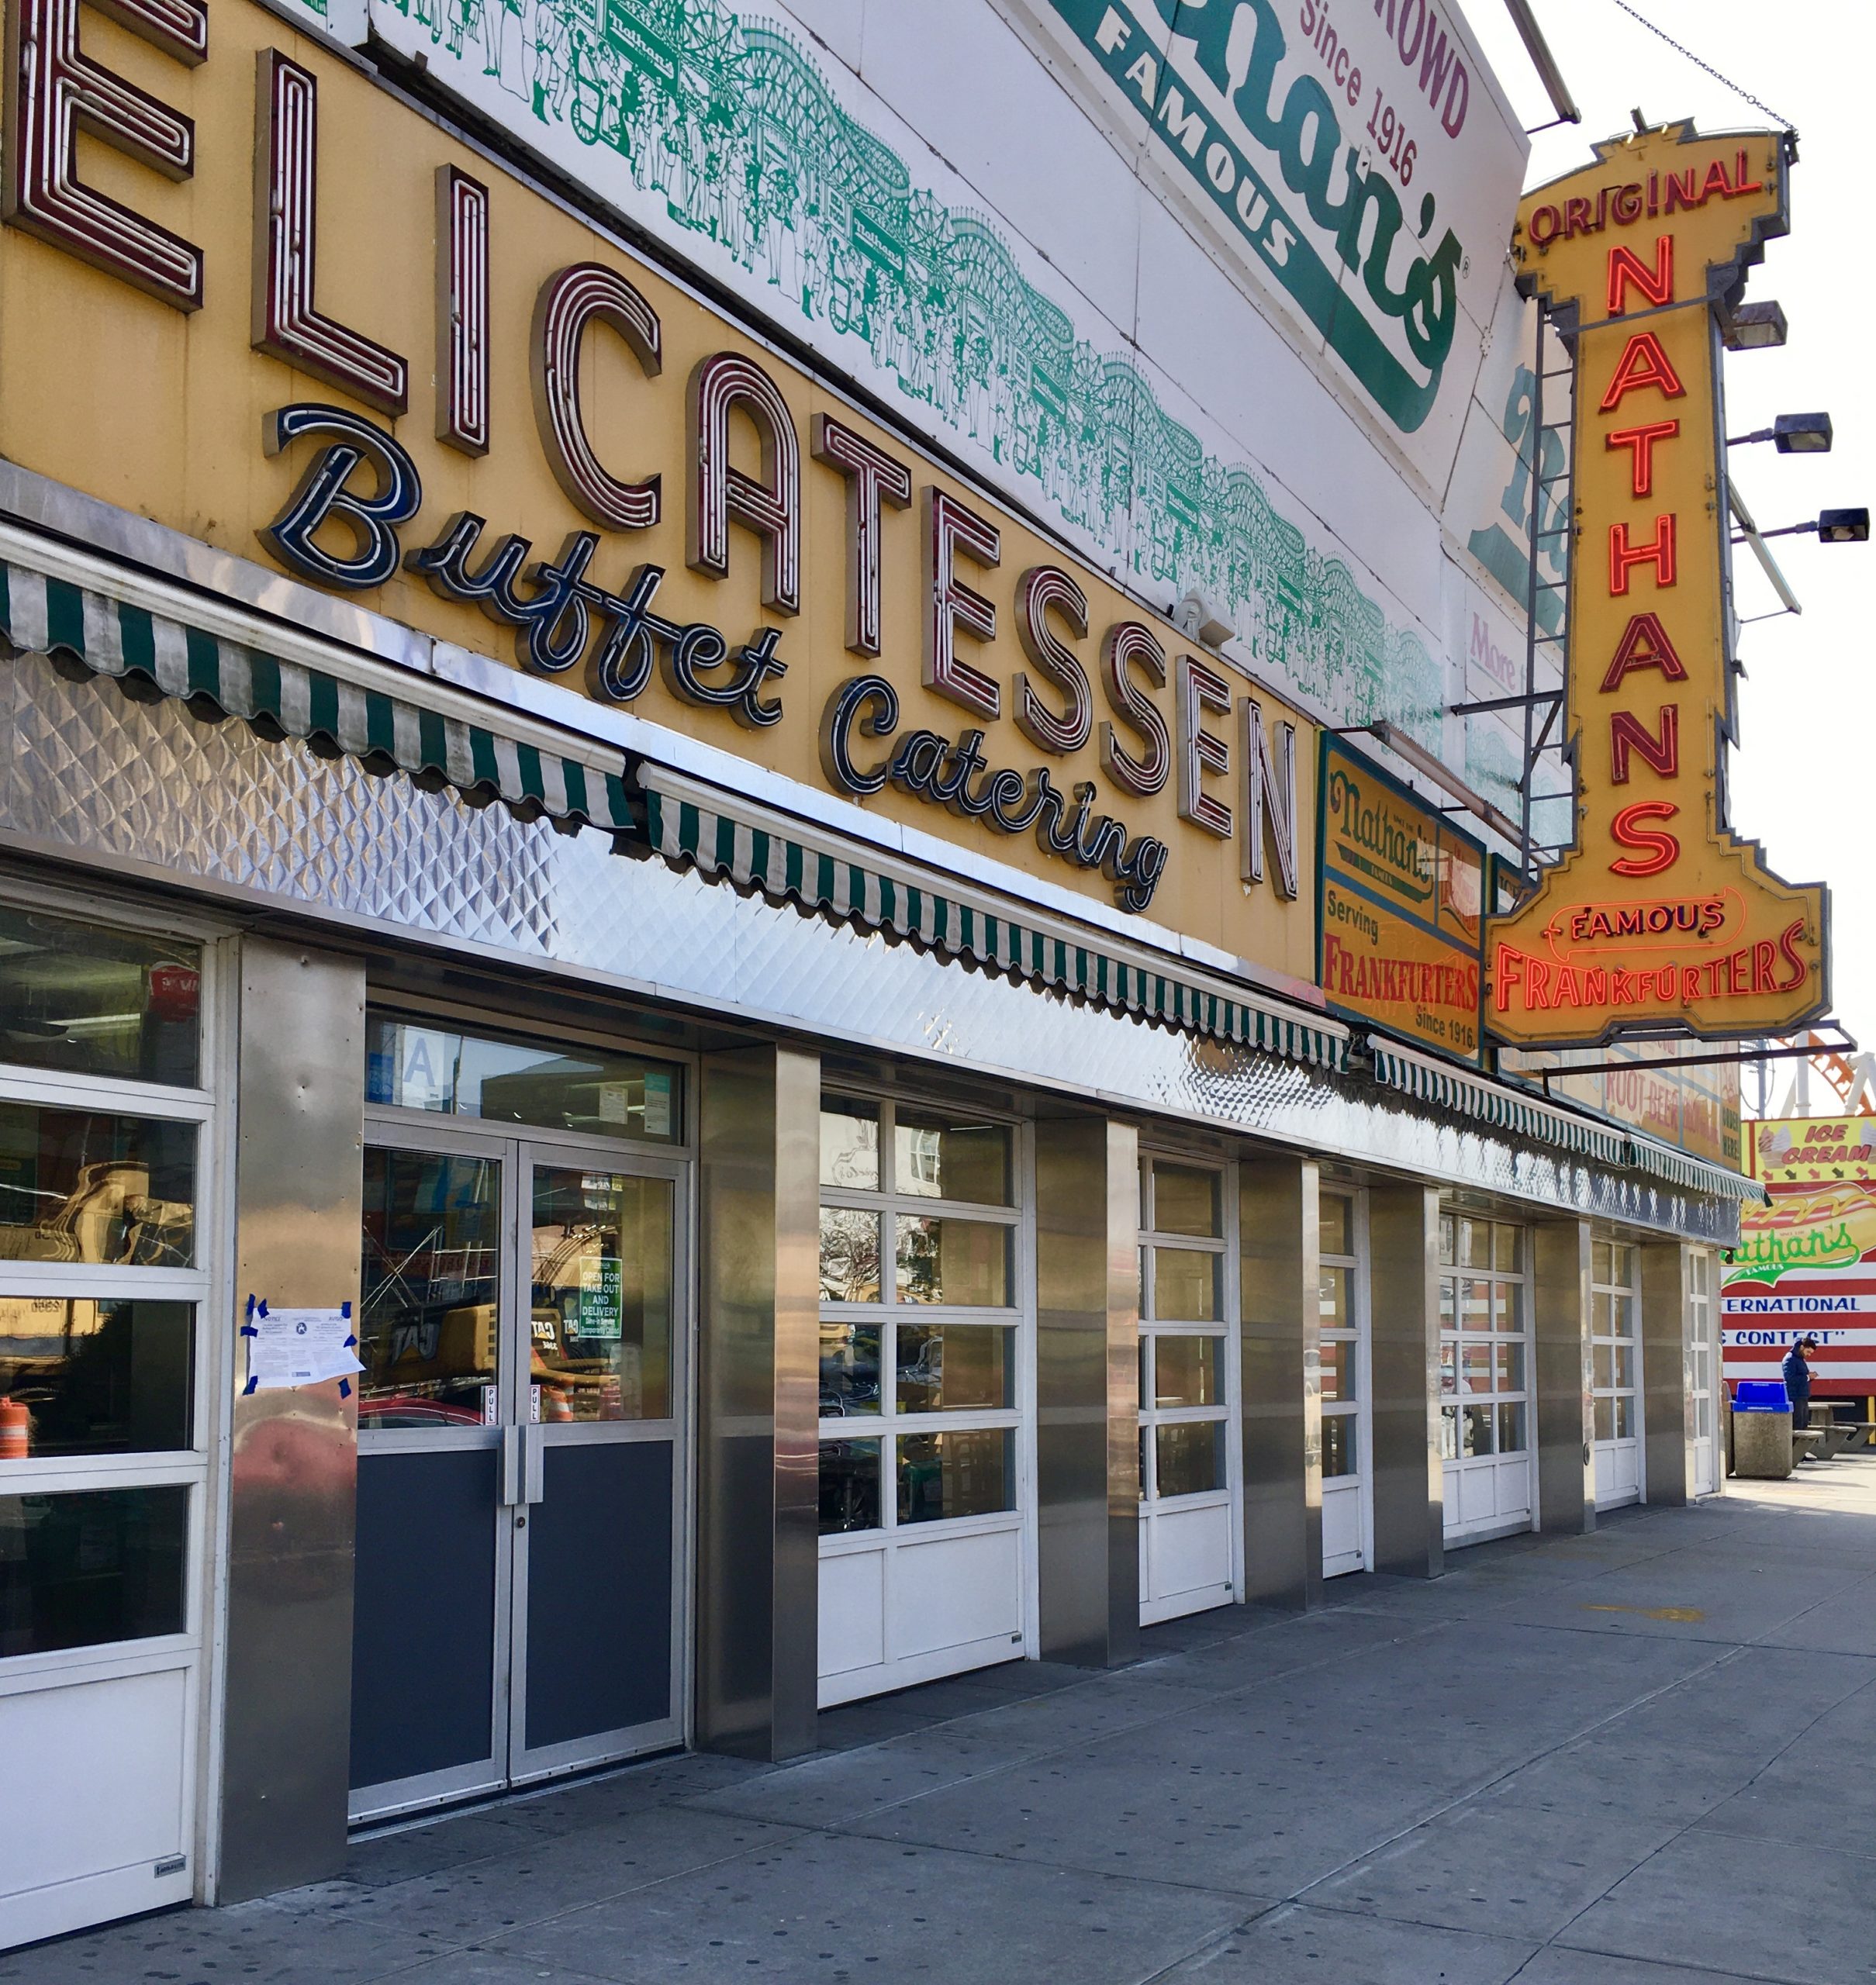 On Surf Avenue, Nathan’s was open for takeout and delivery the day I visited Coney Island. Photo: Lore Croghan/Brooklyn Eagle